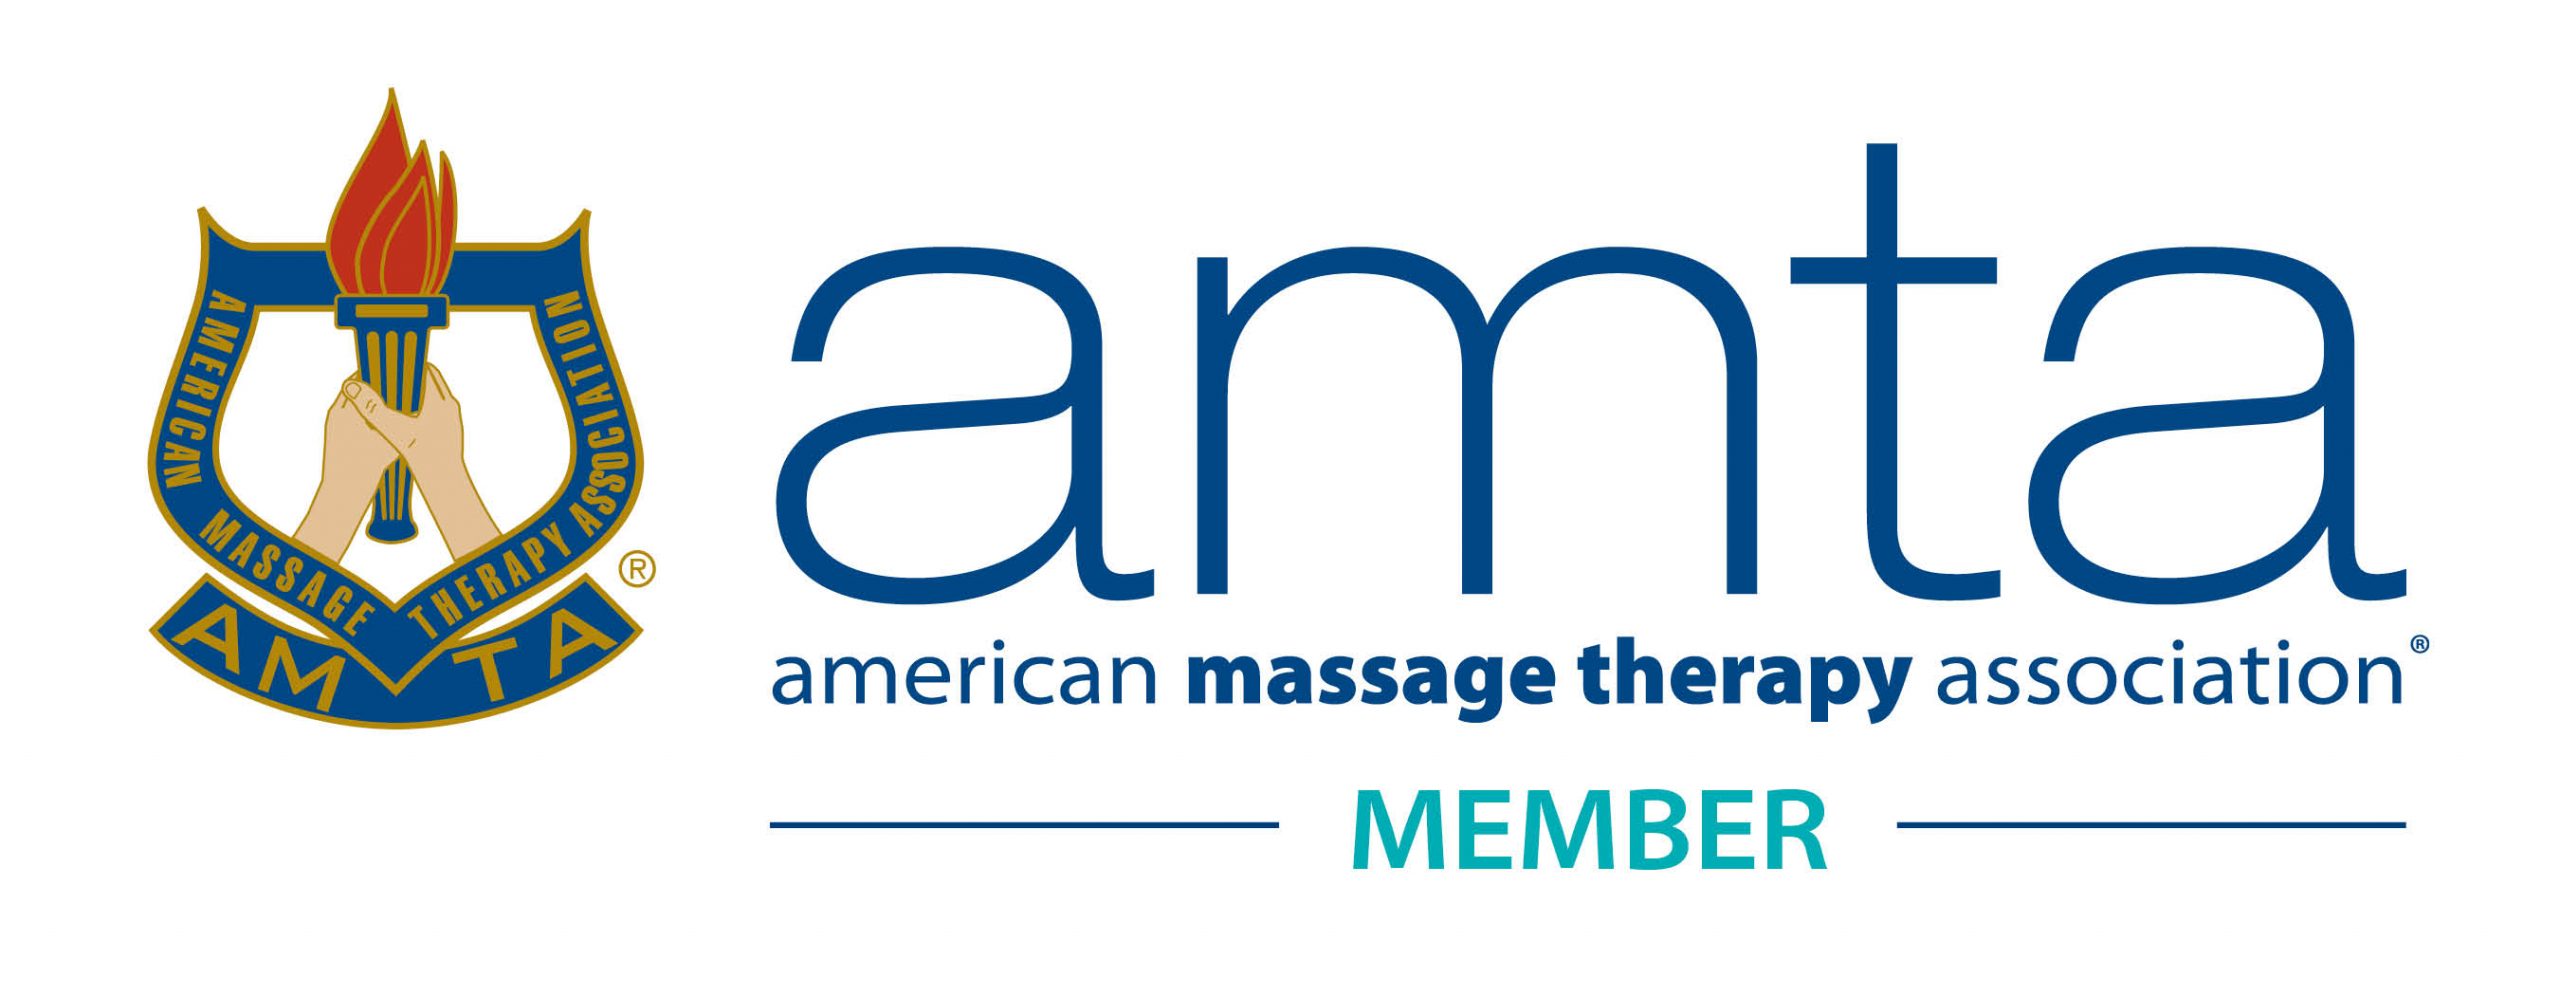 American Massage Therapy Association Member